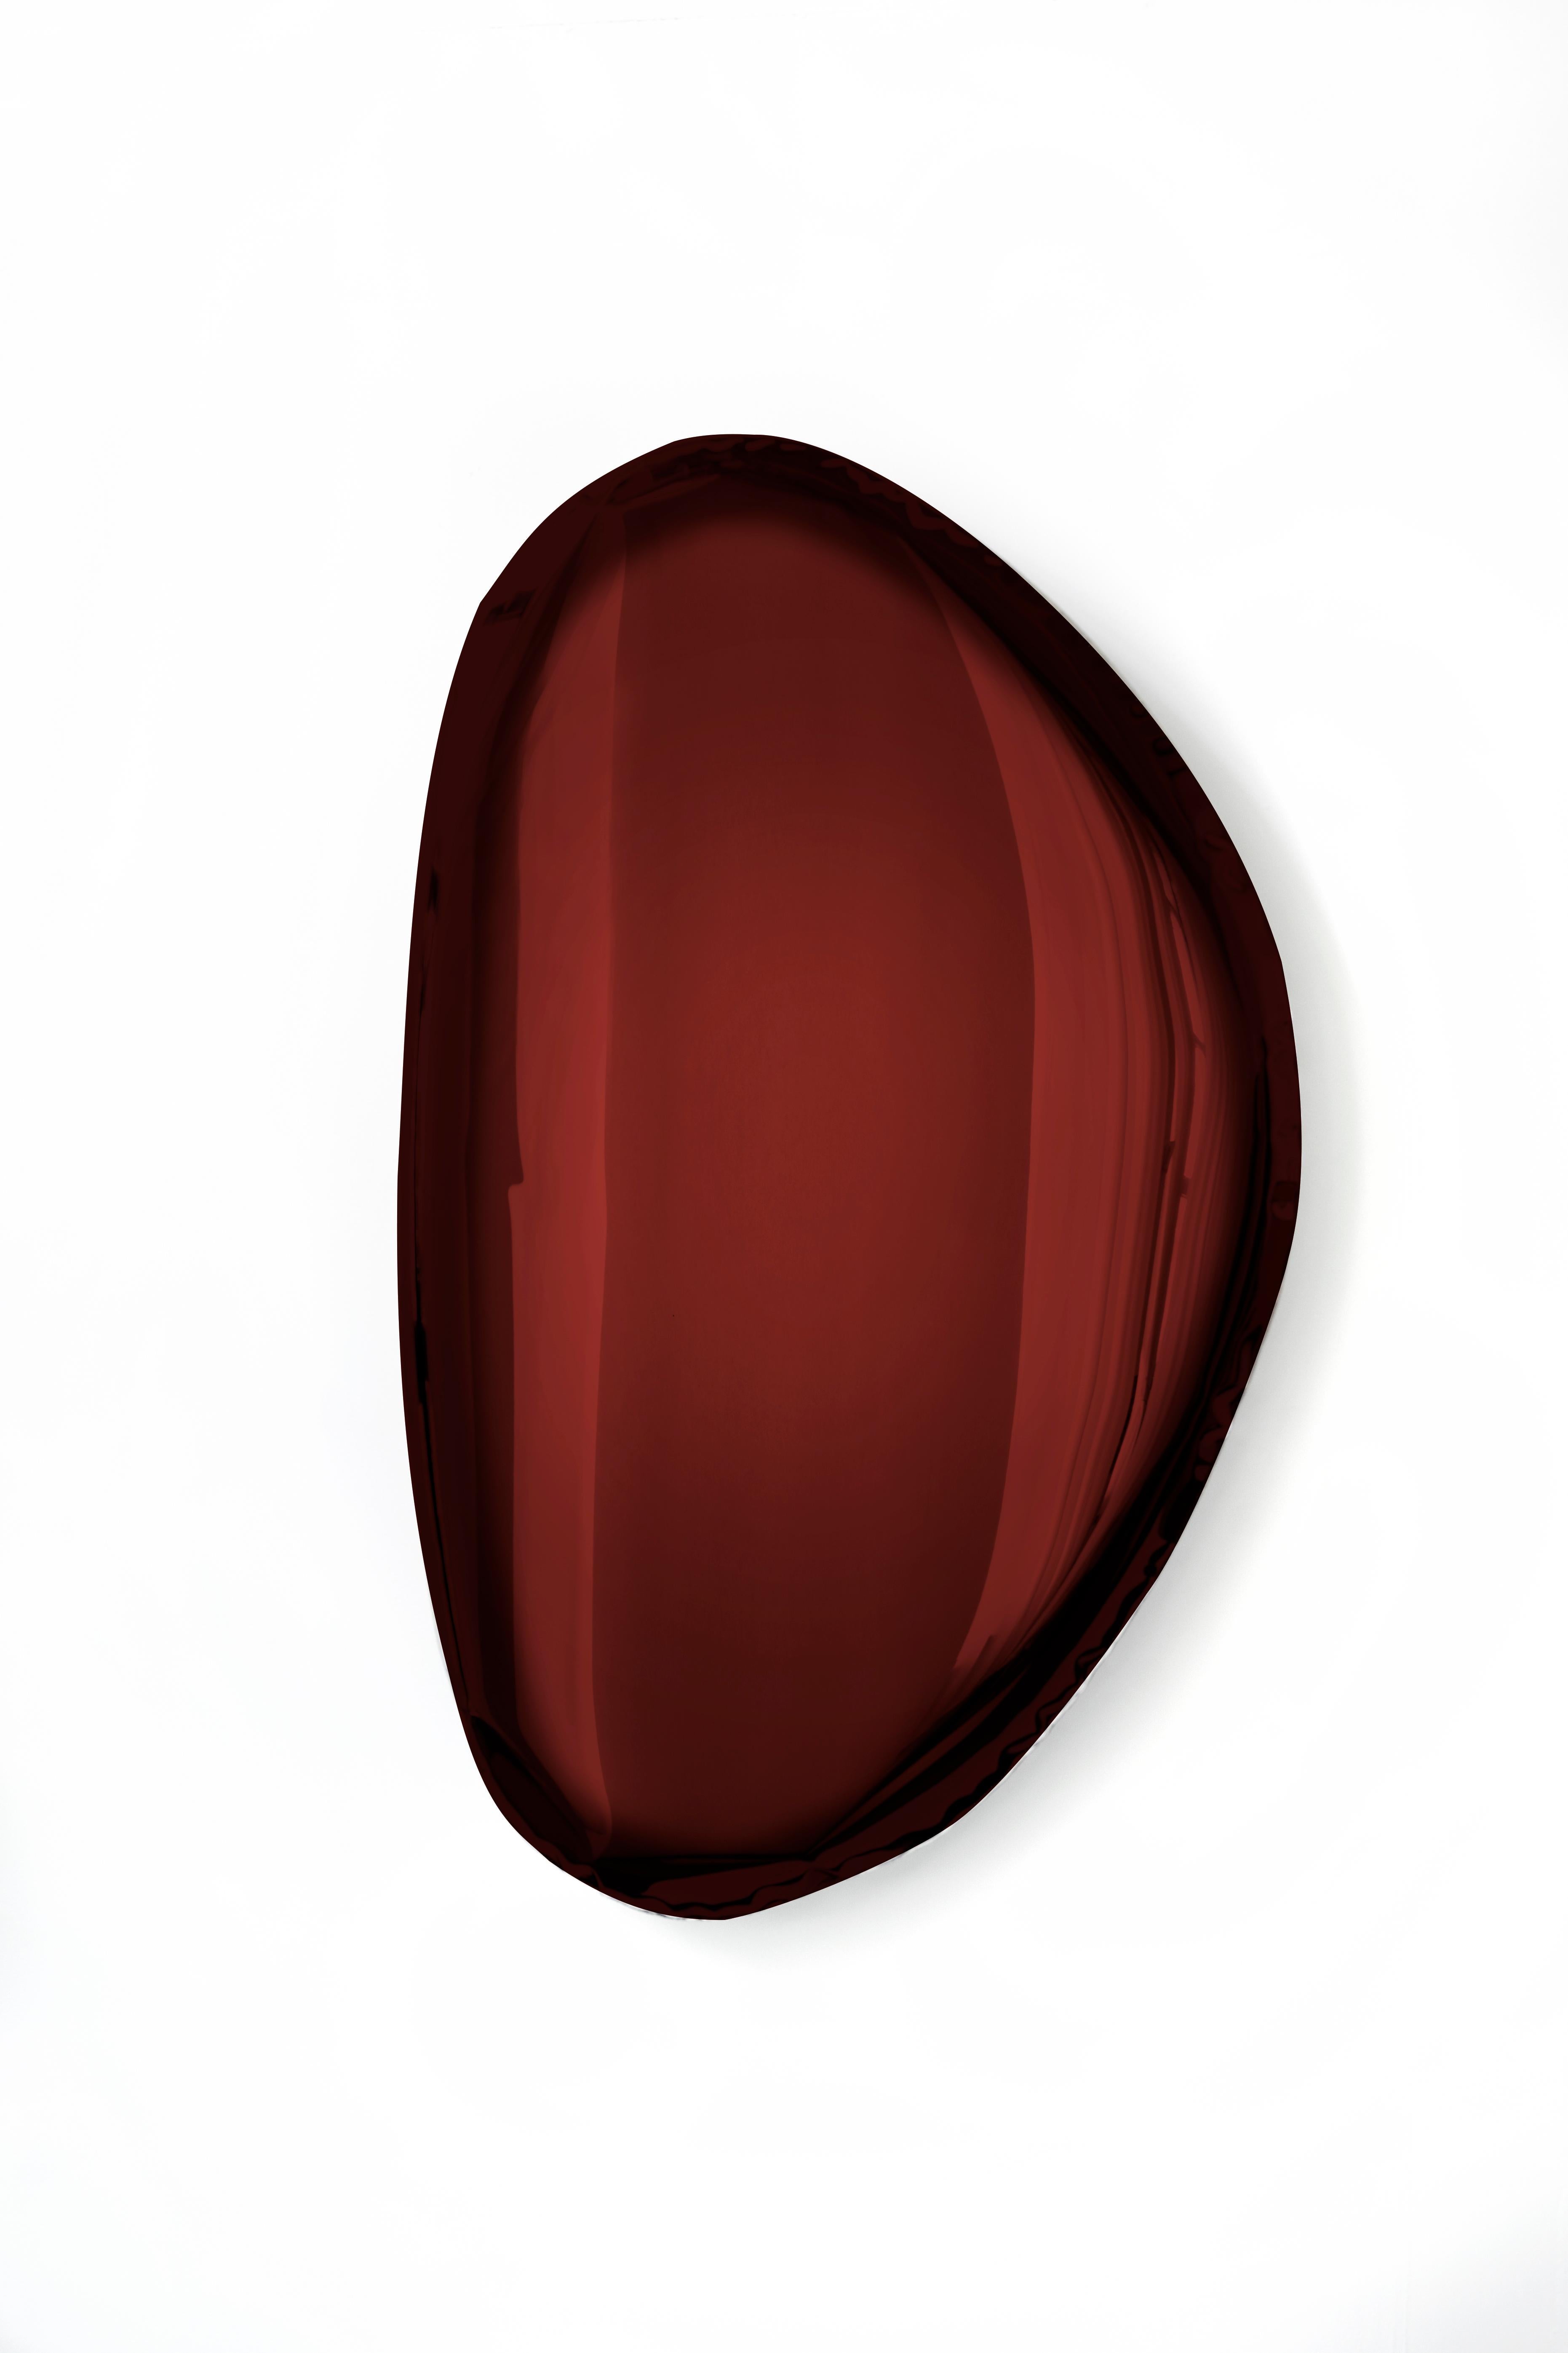 Contemporary Mirror Tafla O6 Rubin Red, in Polished Stainless Steel by Zieta For Sale